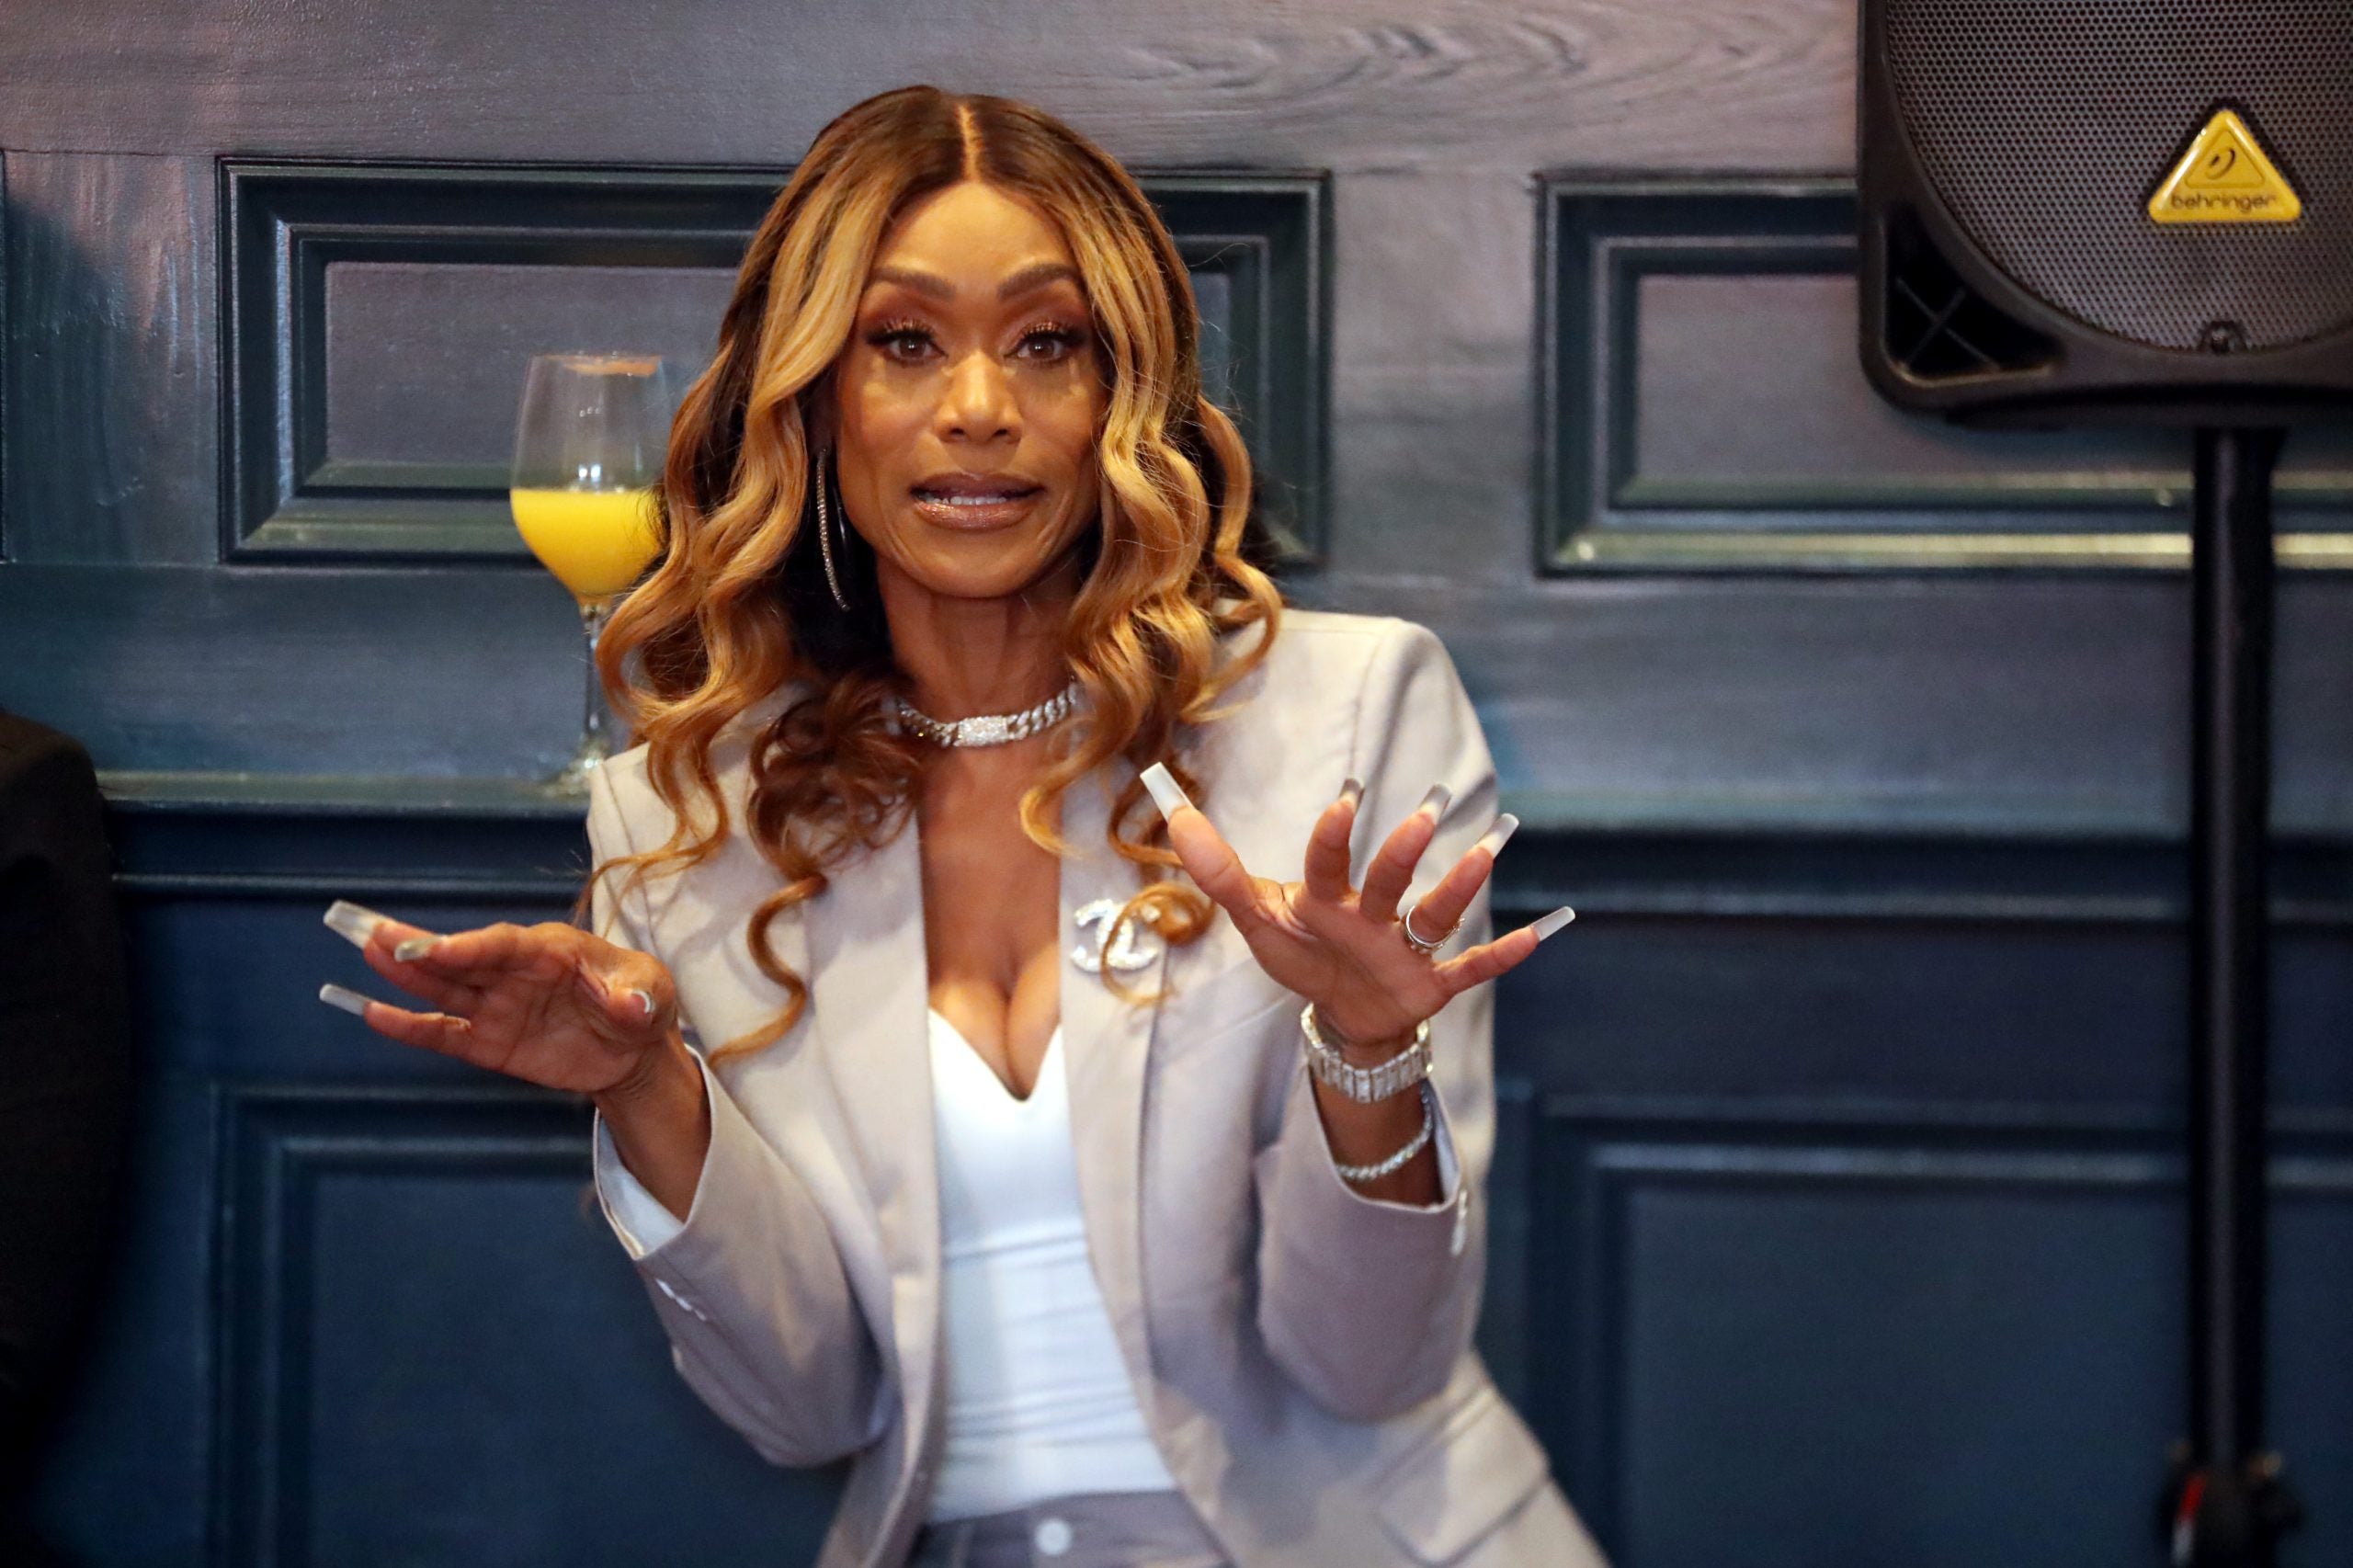 ‘I Always Feel Like I’m Overweight’: Tami Roman Opens Up About Her Body Dysmorphia